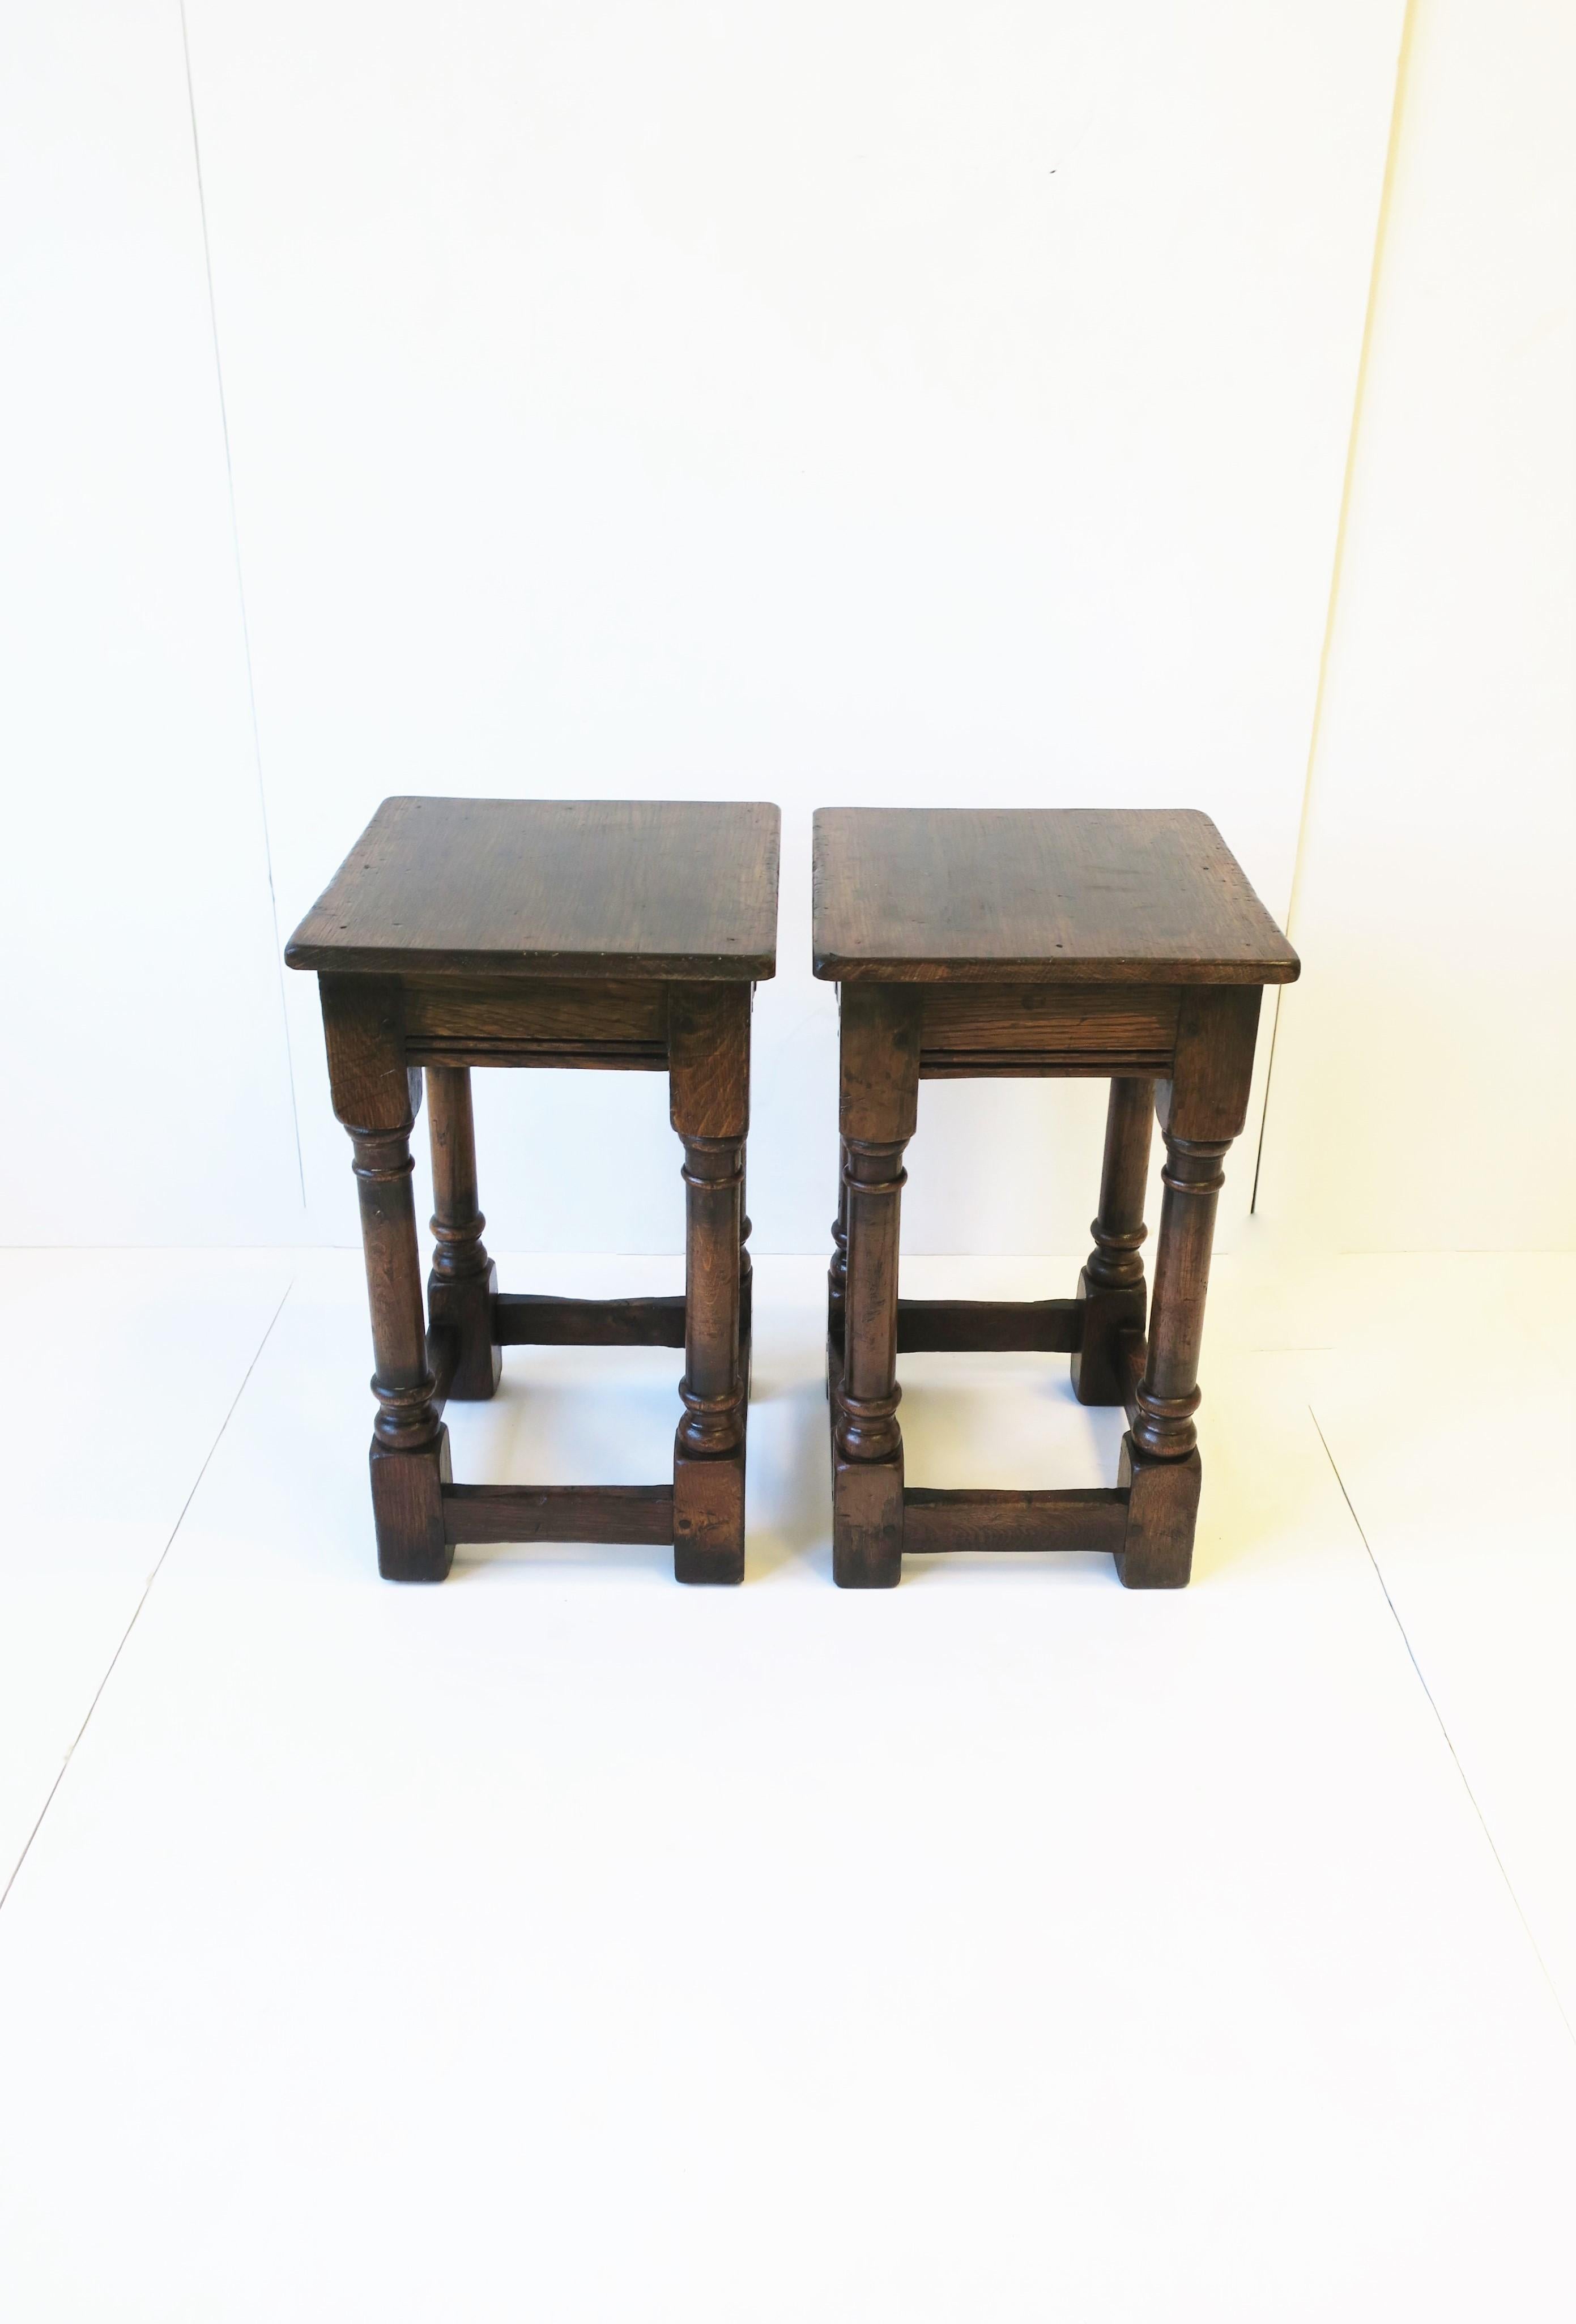 Jacobean Style Wood Side Tables or Stools (Lackiert)